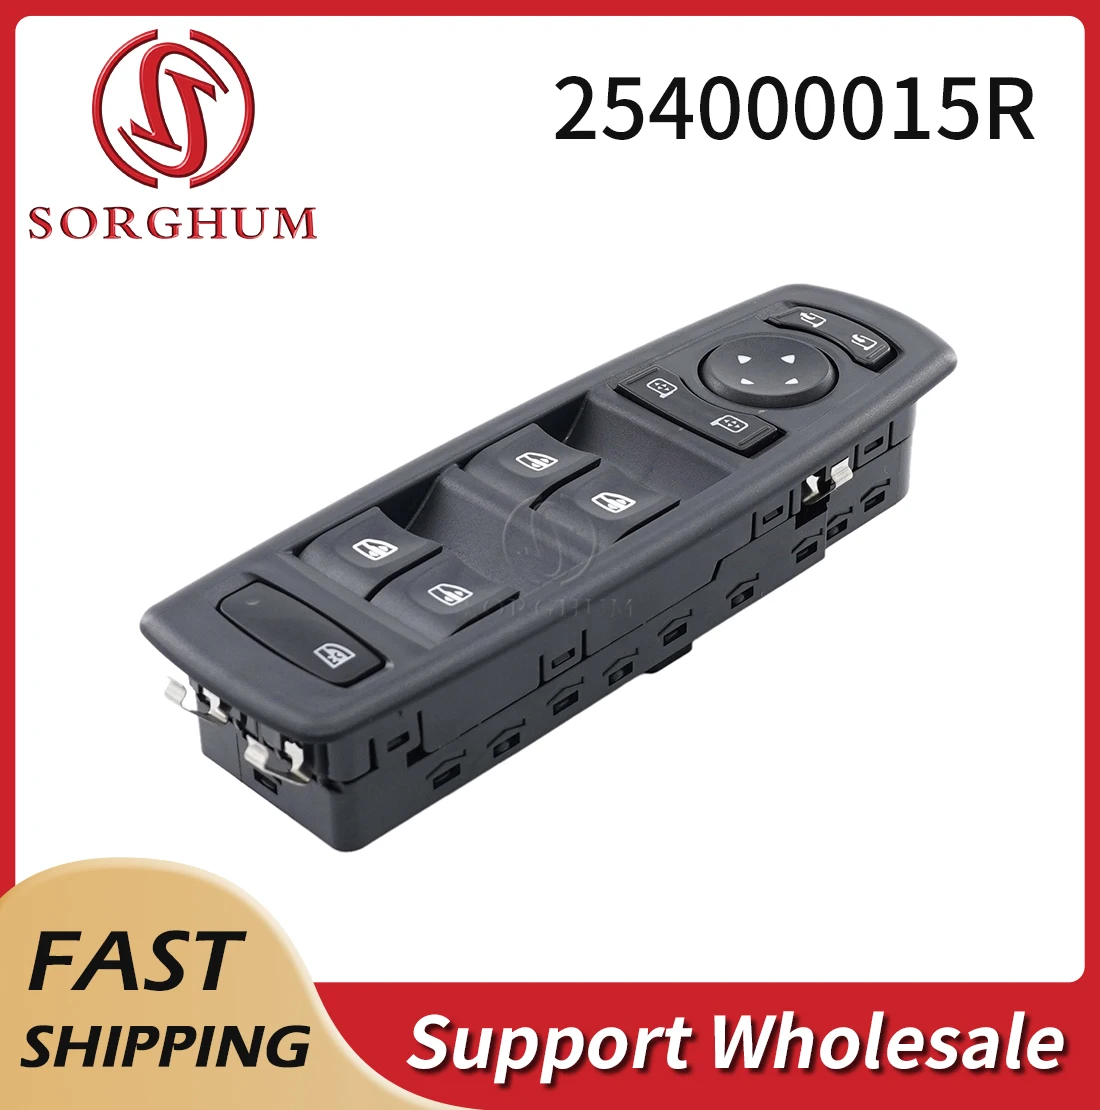 

Sorghum 254000015R Car Driver Side Electric Master Window Control Switch Button For Renault Megane Laguna 2008-2016 25400-0015R